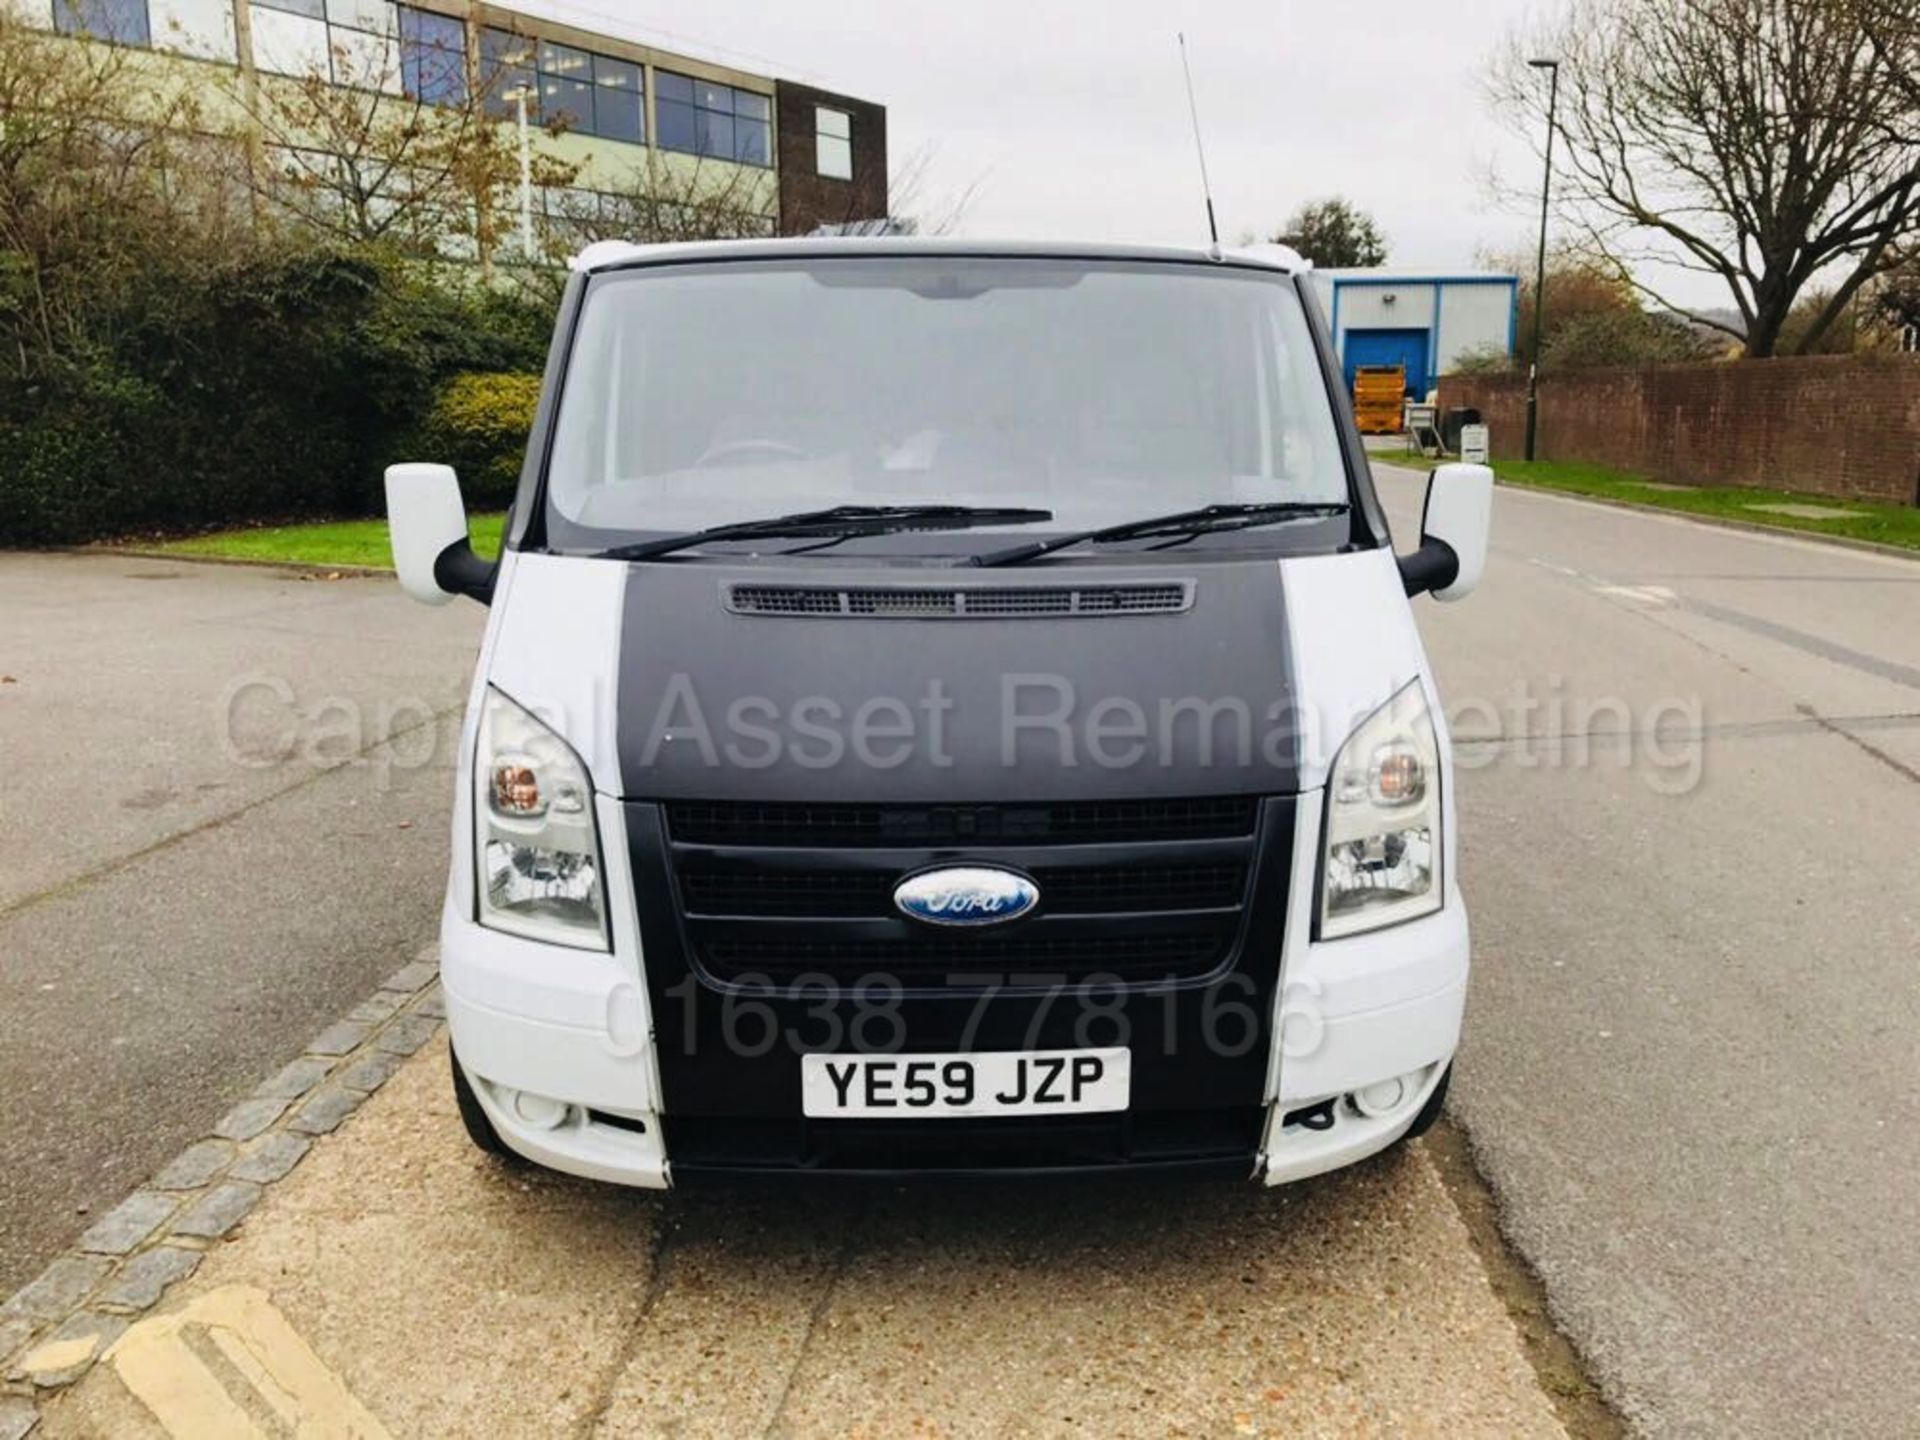 FORD TRANSIT 85 T260 SWB *SPORTY* (2010 MODEL) '2.2 TDCI - 85 PS - 5 SPEED' (NO VAT - SAVE 20%) - Image 8 of 22